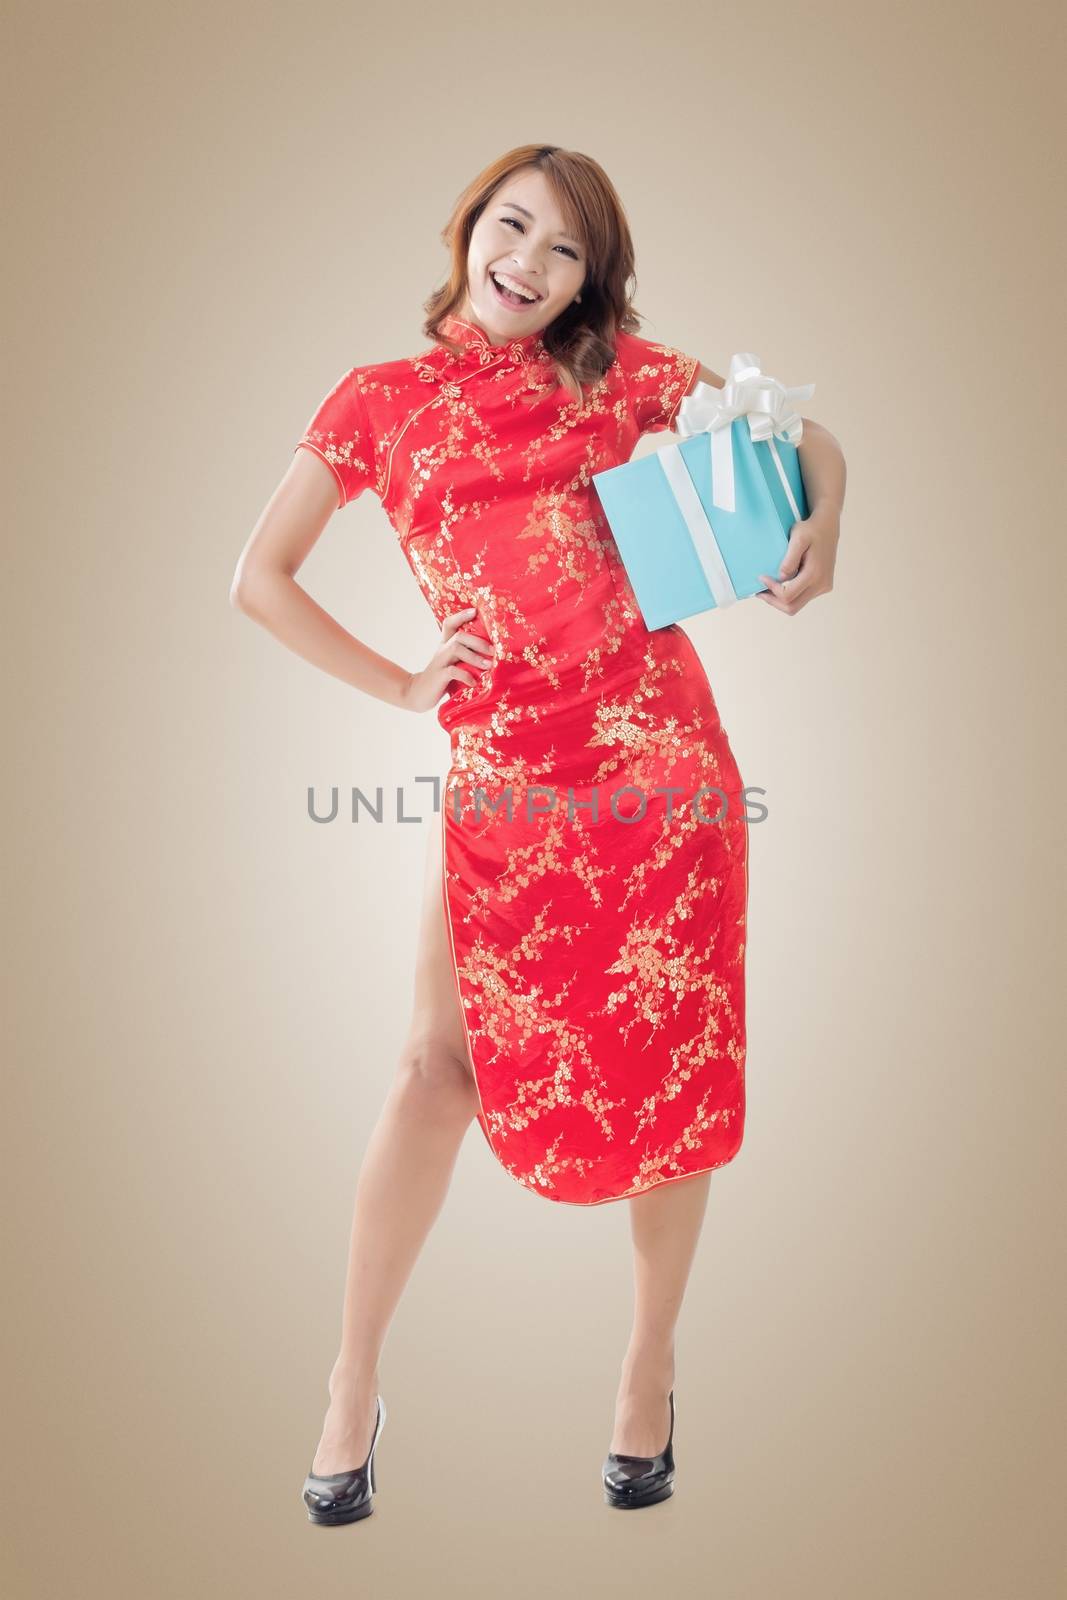 Smiling Chinese woman dress traditional cheongsam standing and holding a gift box at New Year, full length portrait isolated.